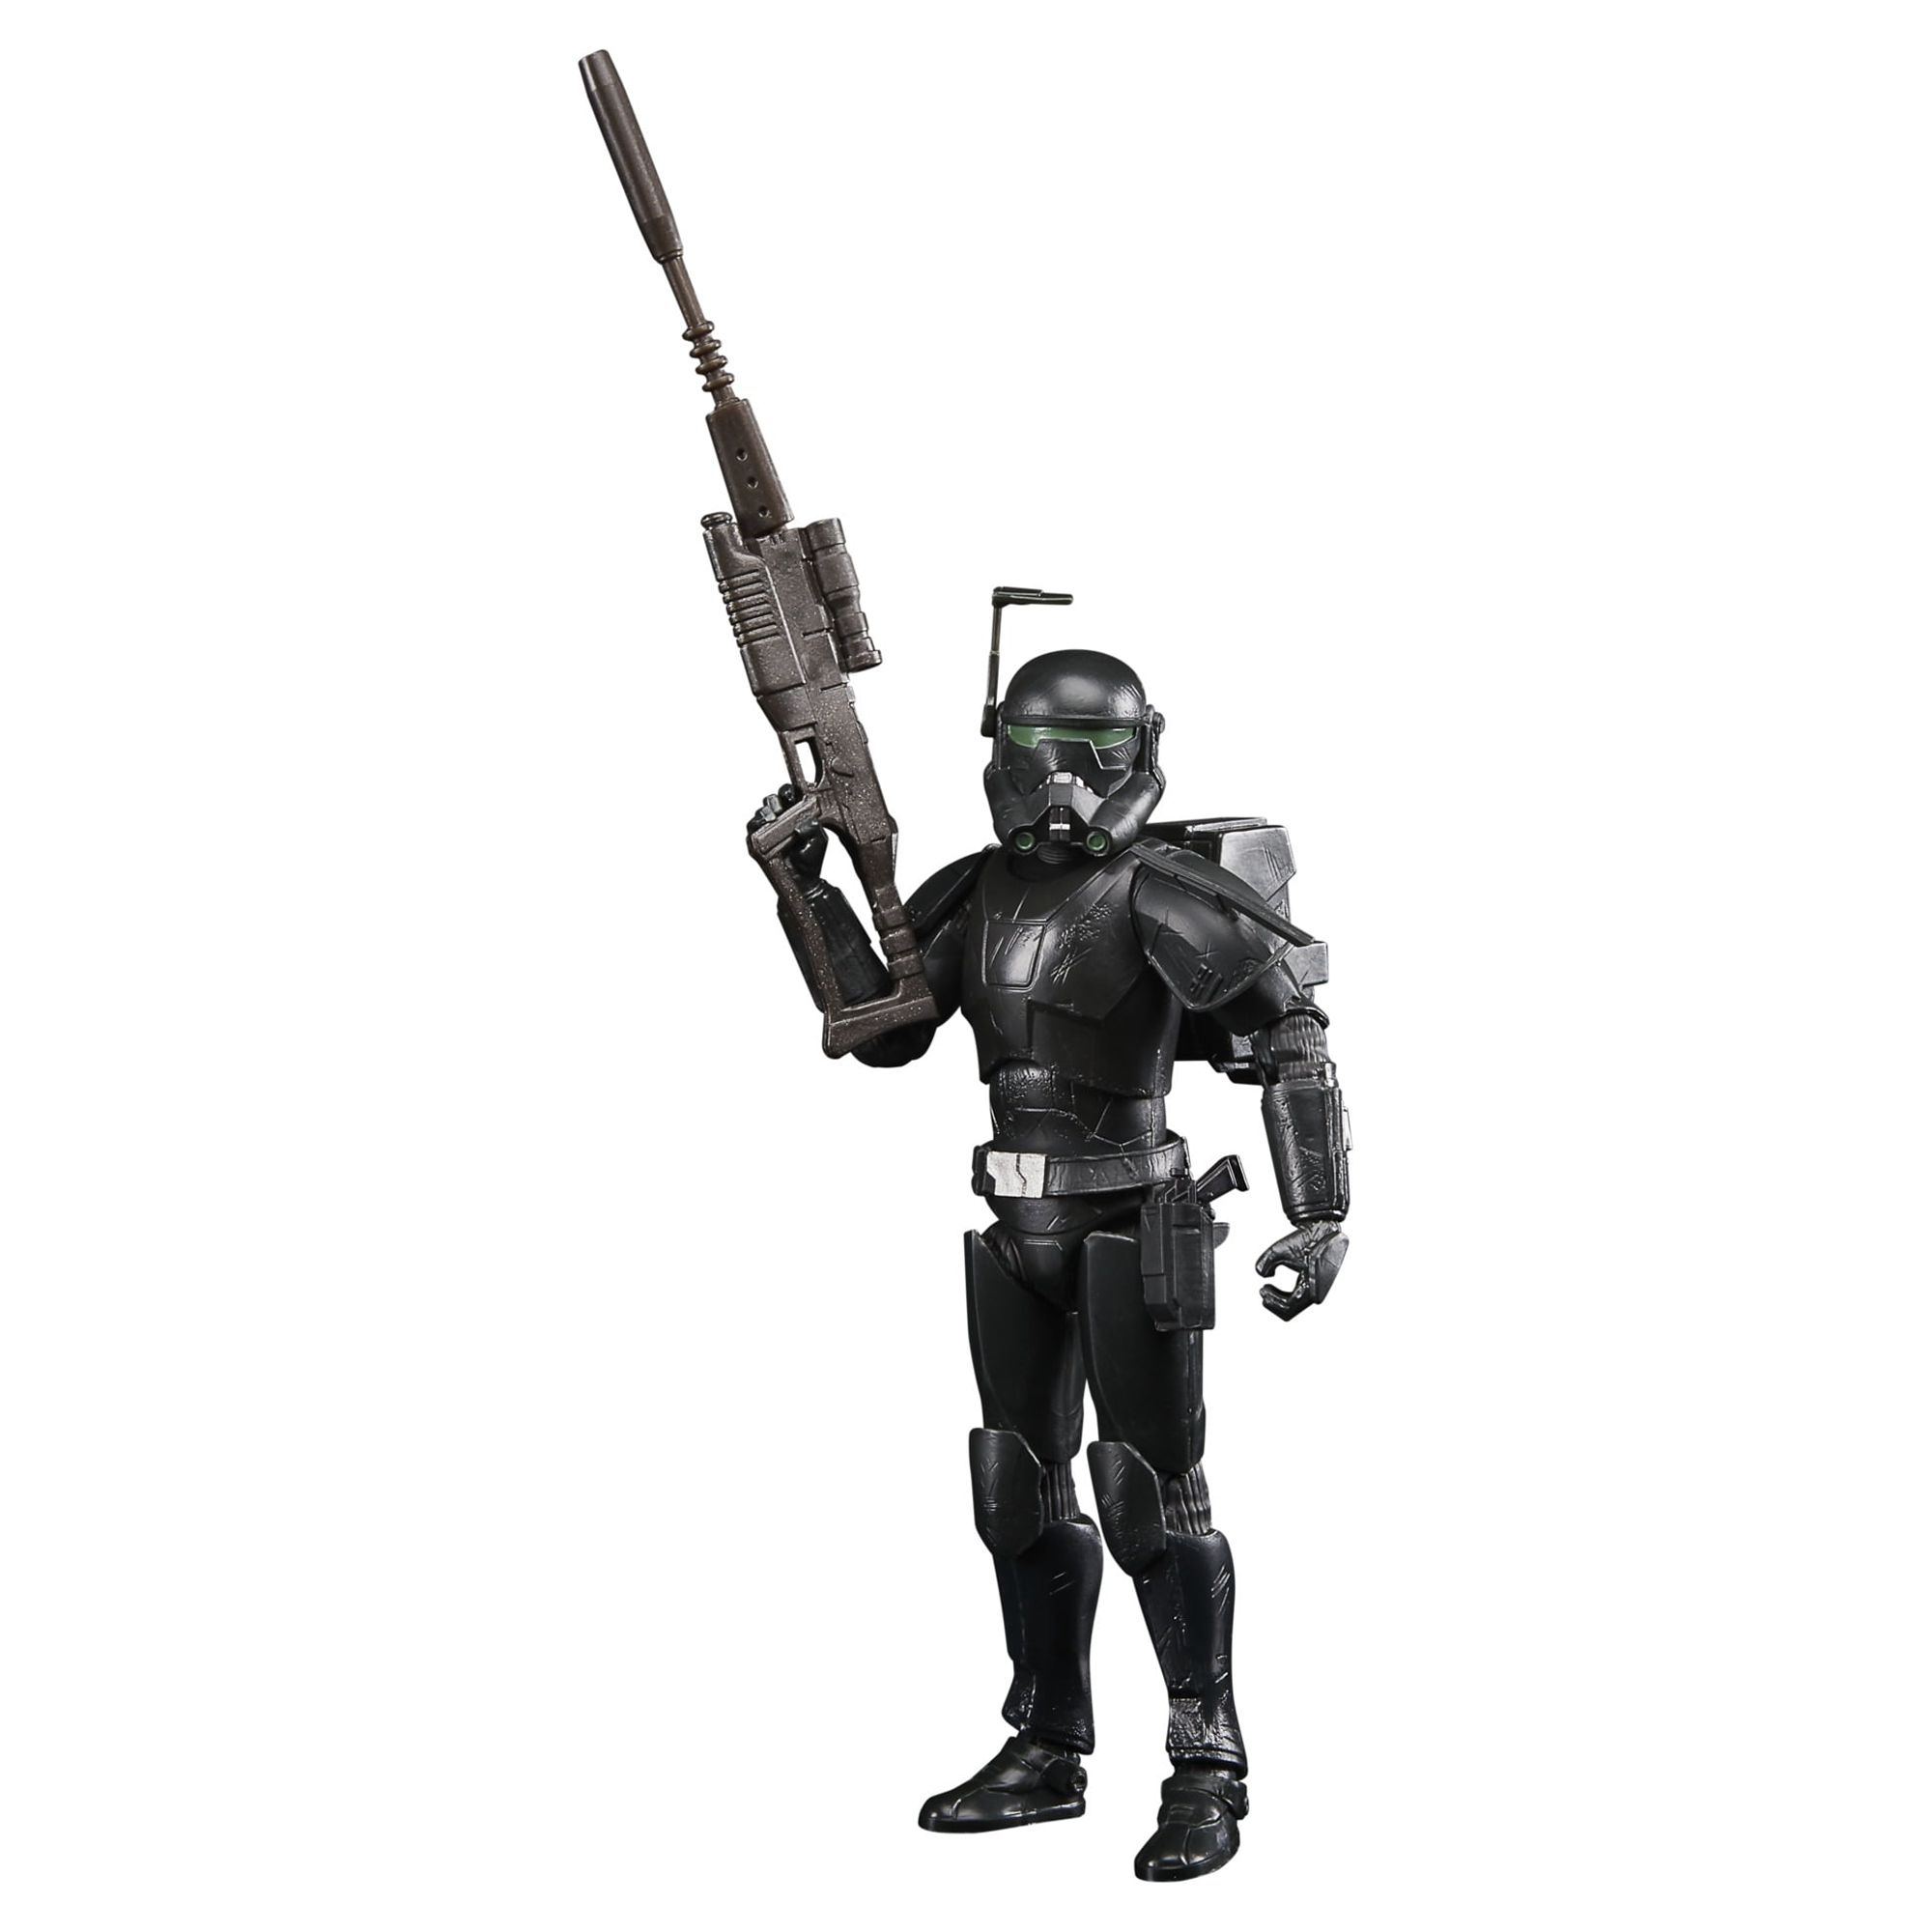 Star Wars: The Black Series Crosshair (Imperial) Kids Toy Action Figure for Boys and Girls Ages 4 5 6 7 8 and Up - image 1 of 8